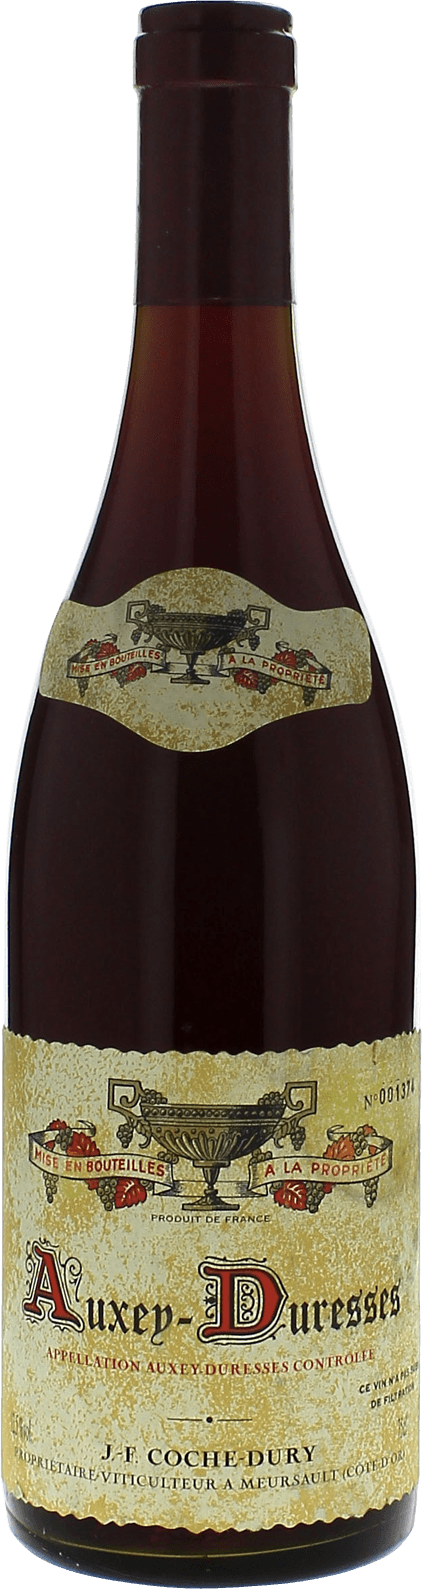 Auxey duresses rouge 2013 Domaine COCHE-DURY, Bourgogne rouge